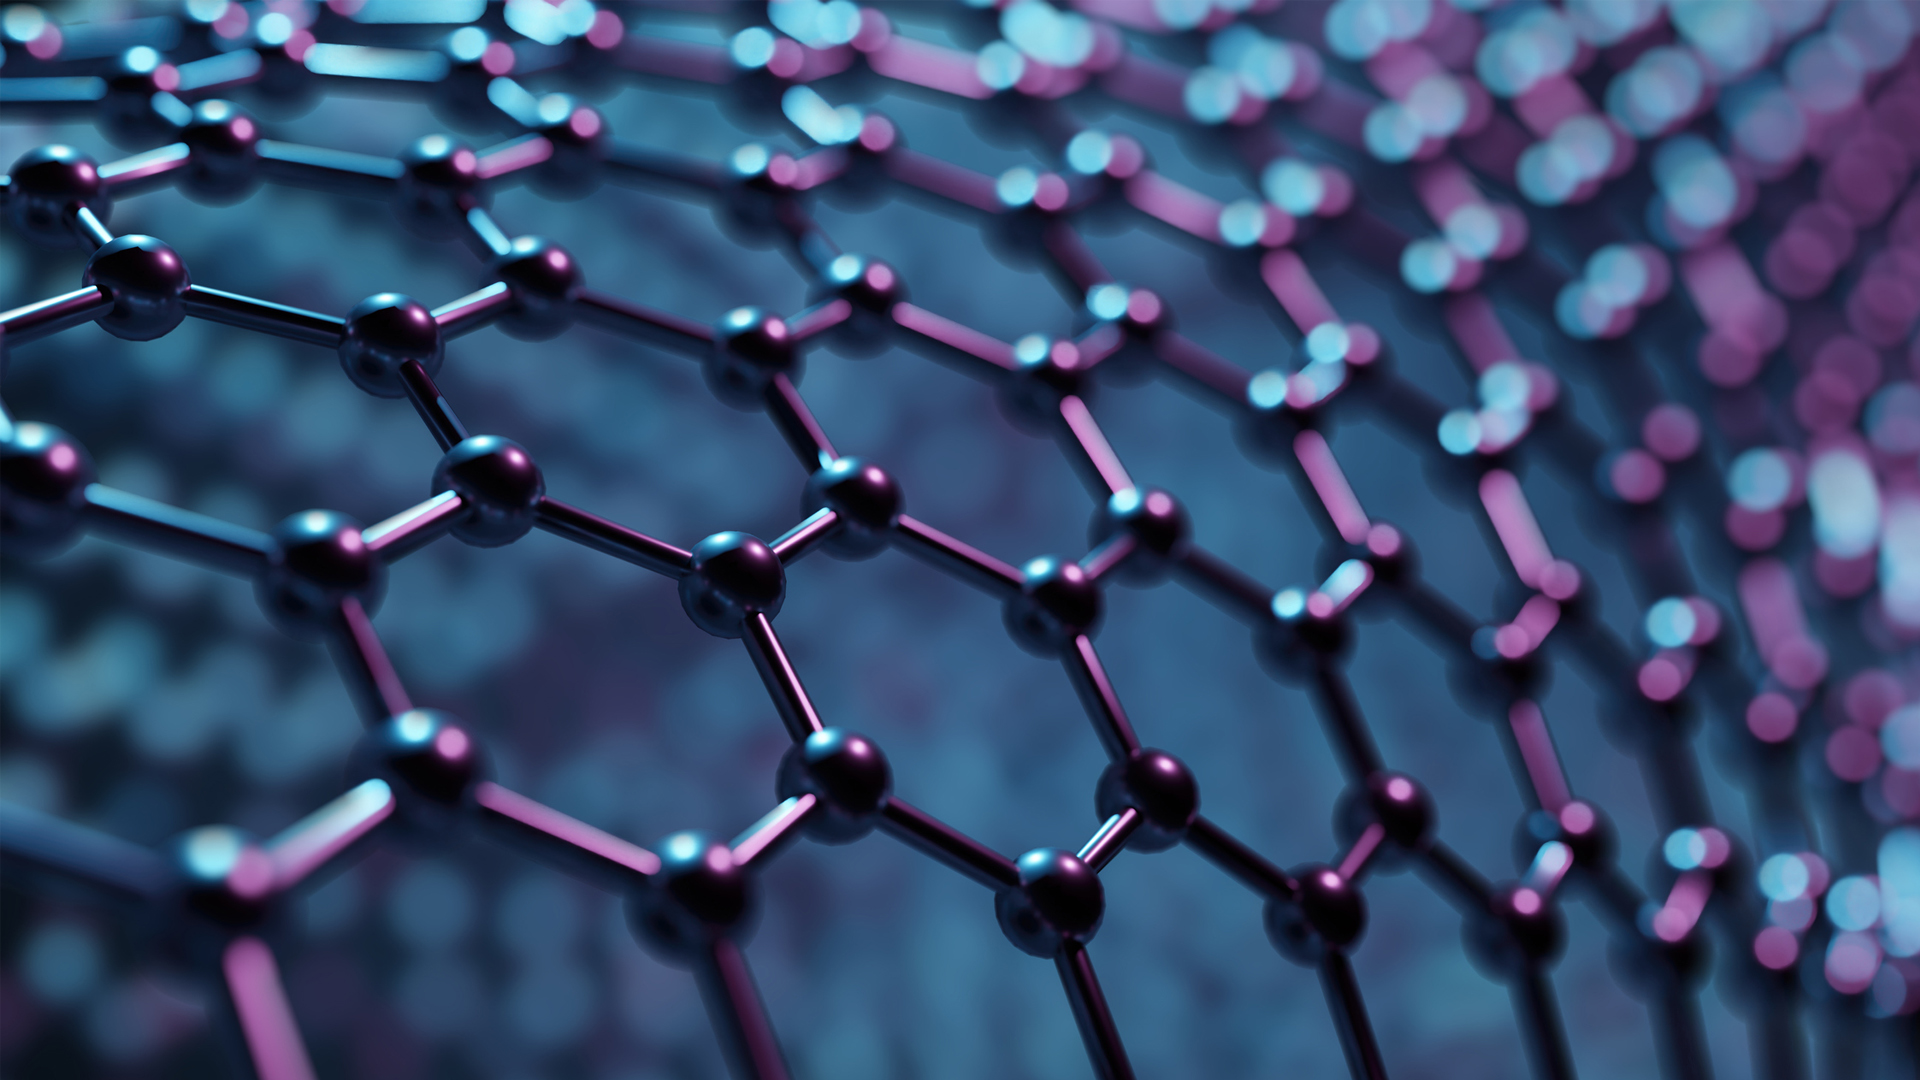 Graphene has ability to interact with functions of nervous system